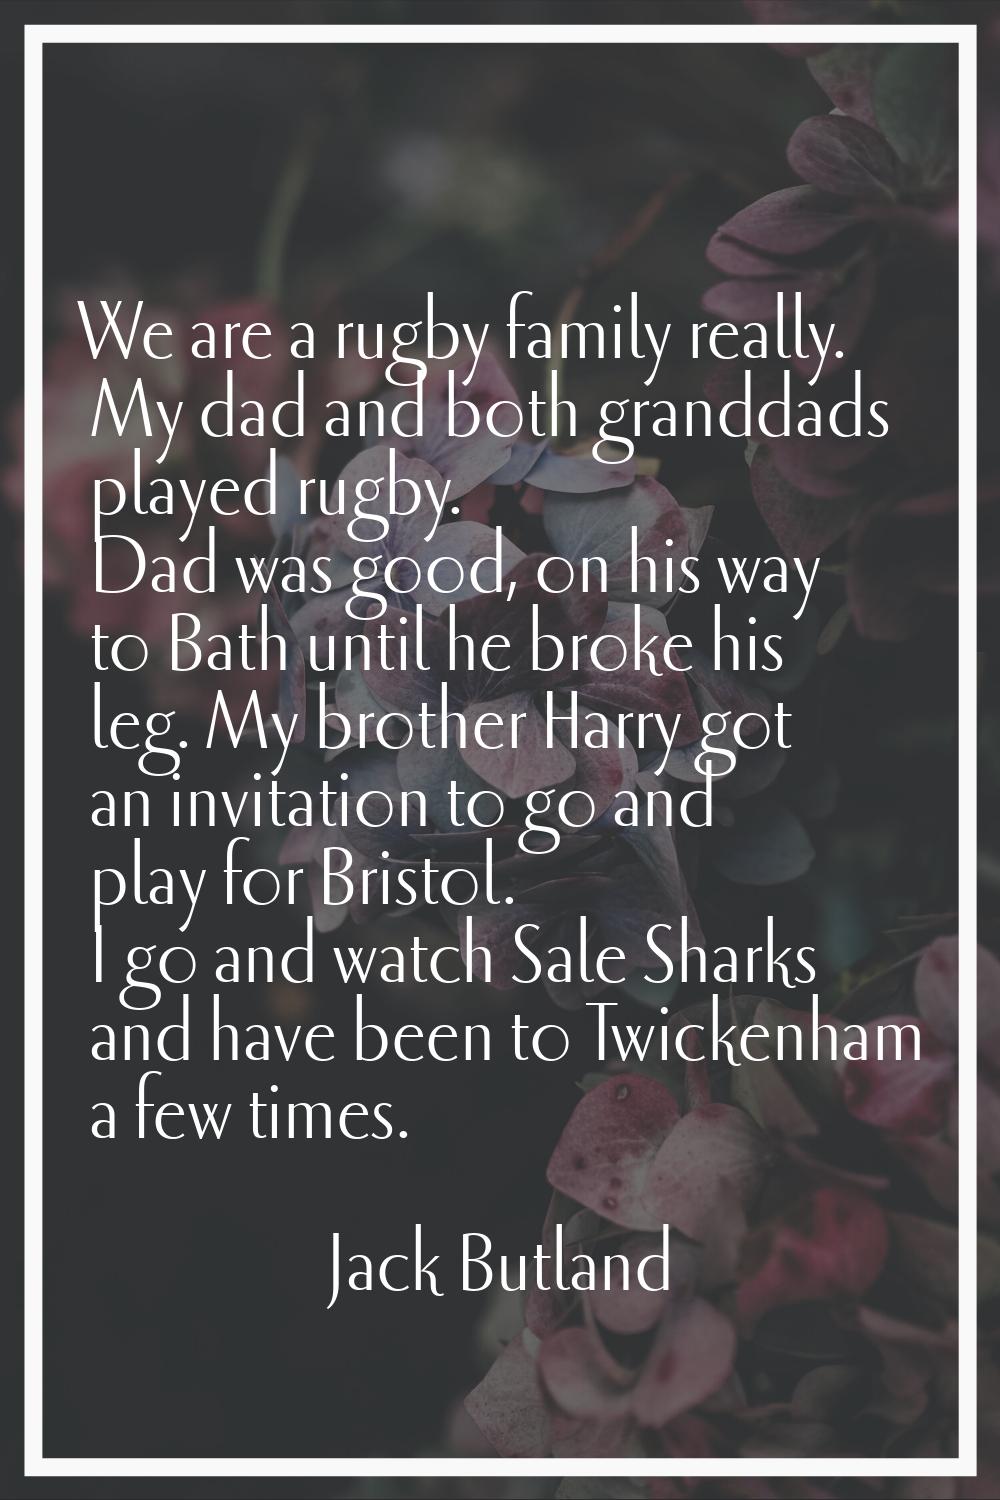 We are a rugby family really. My dad and both granddads played rugby. Dad was good, on his way to B